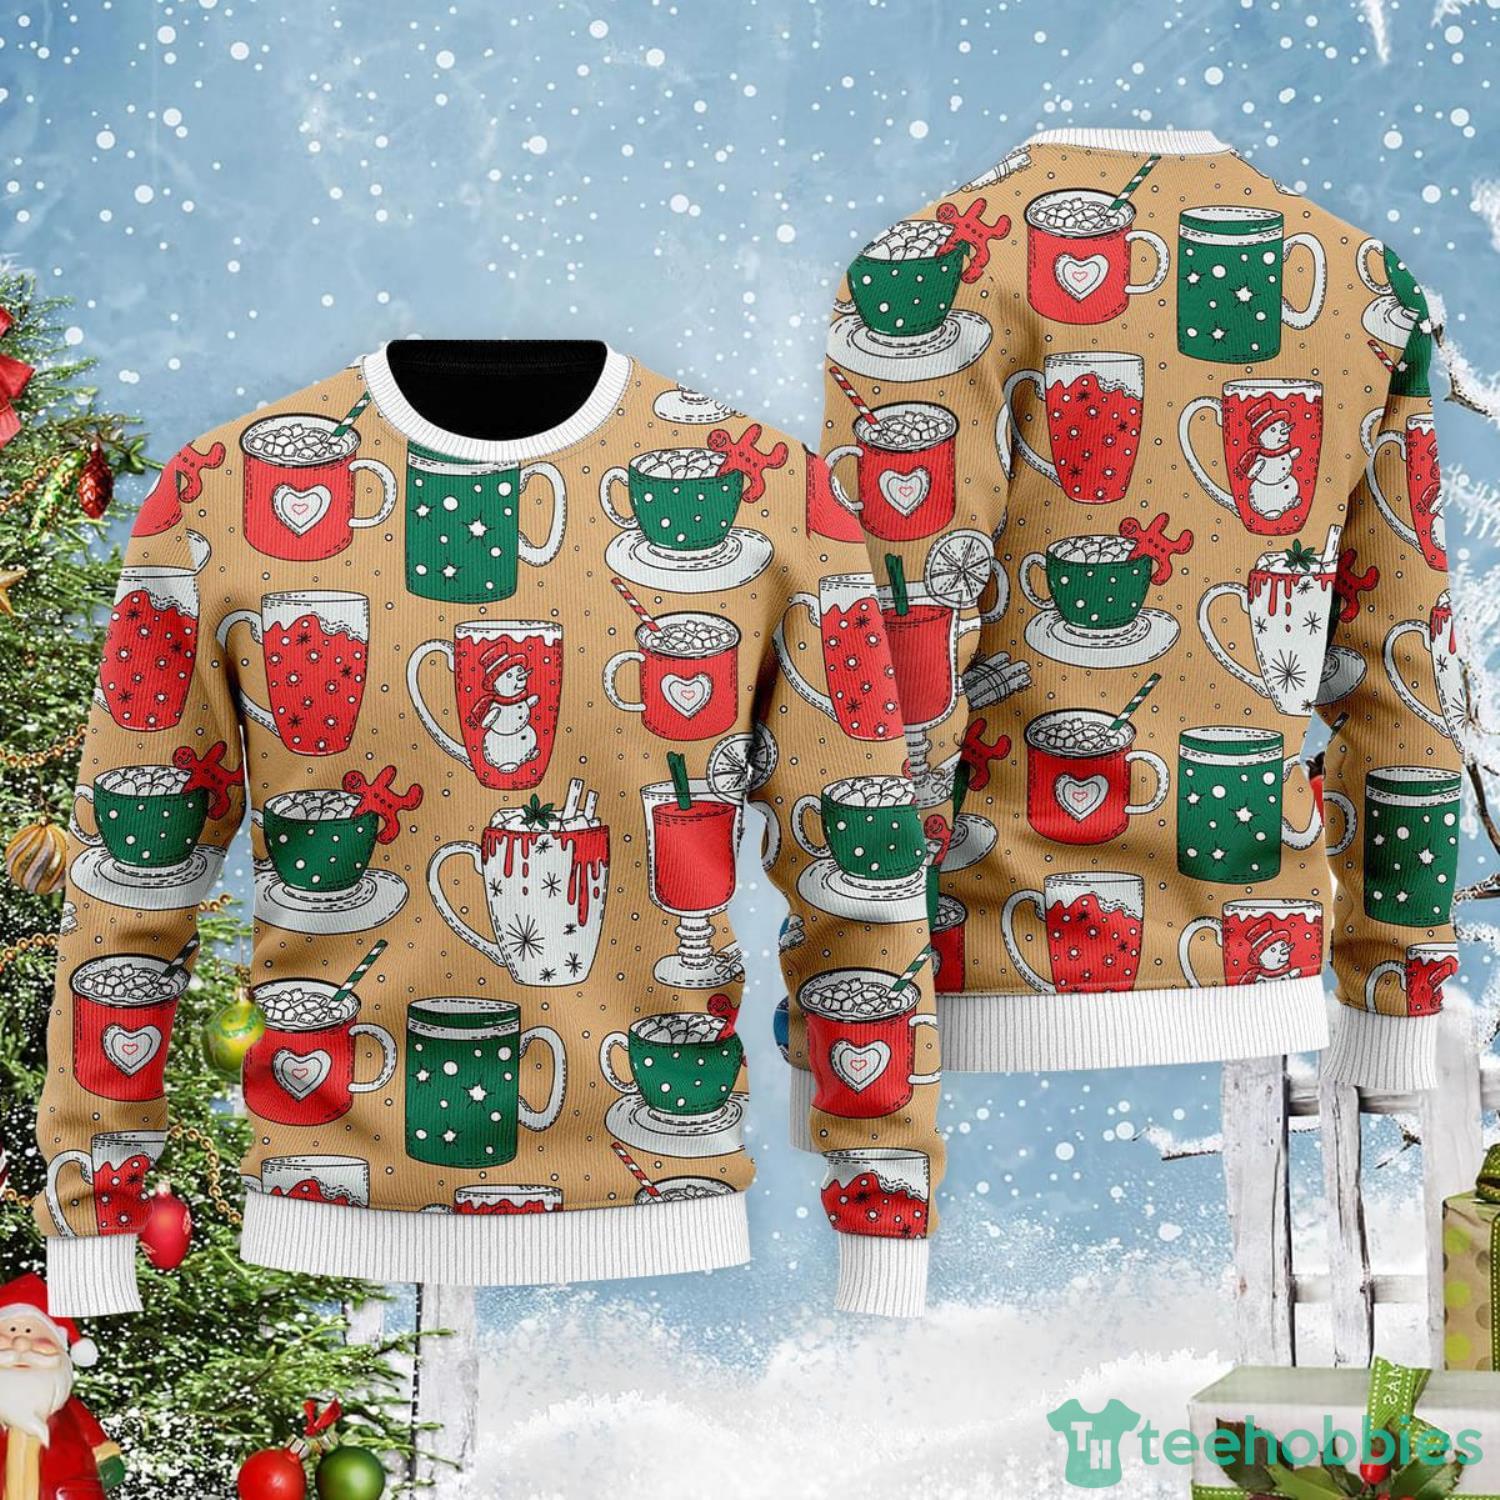 https://image.teehobbies.us/2022/11/eat-drink-be-tacky-holiday-all-over-print-ugly-christmas-sweater.jpg